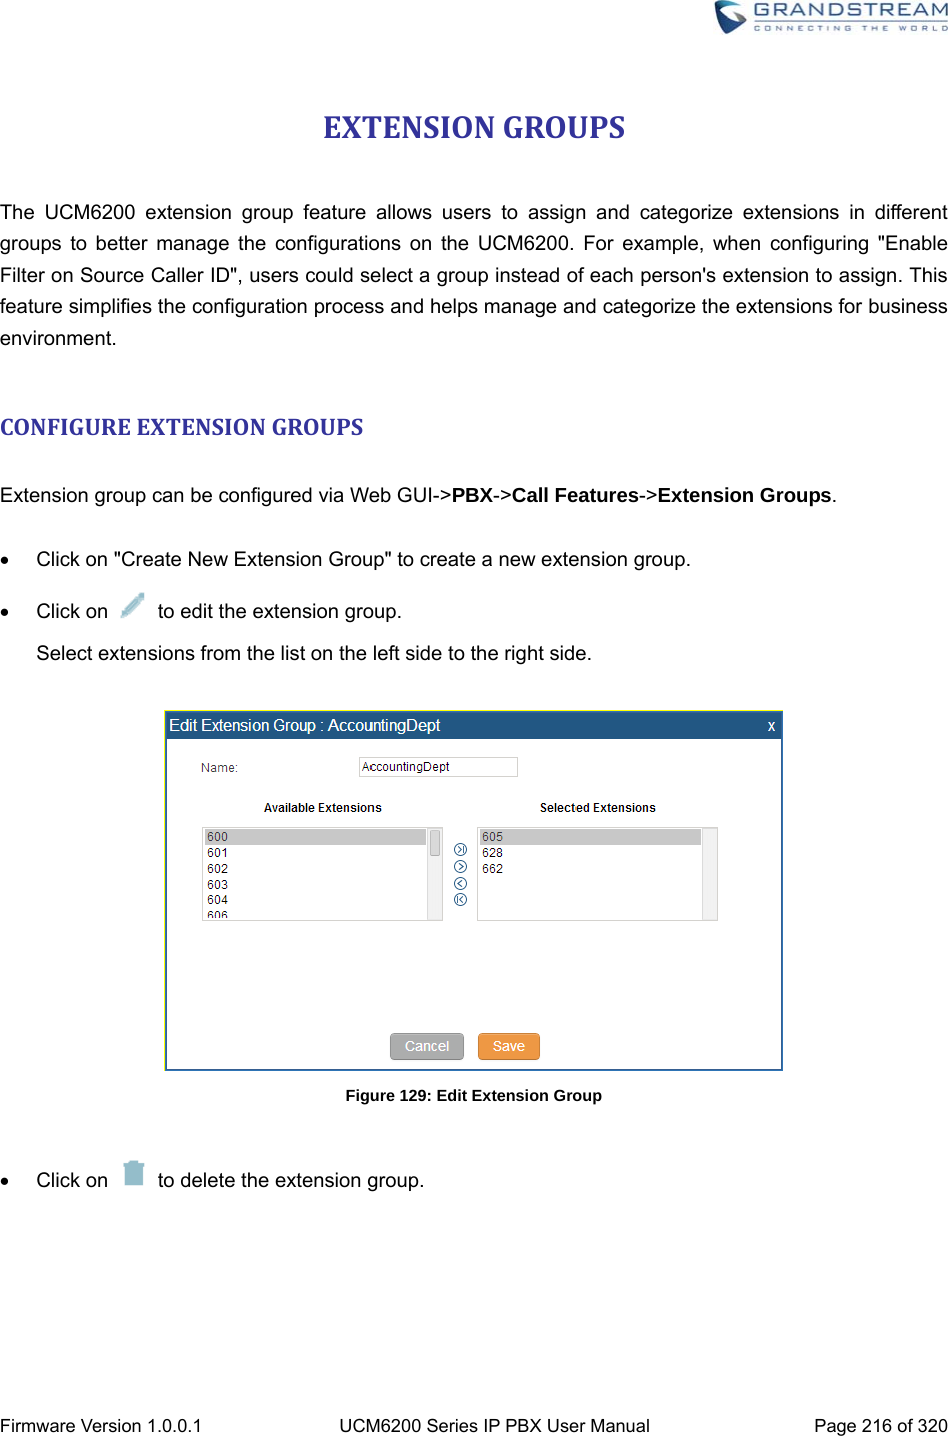  Firmware Version 1.0.0.1  UCM6200 Series IP PBX User Manual  Page 216 of 320 EXTENSIONGROUPS The UCM6200 extension group feature allows users to assign and categorize extensions in different groups to better manage the configurations on the UCM6200. For example, when configuring &quot;Enable Filter on Source Caller ID&quot;, users could select a group instead of each person&apos;s extension to assign. This feature simplifies the configuration process and helps manage and categorize the extensions for business environment.  CONFIGUREEXTENSIONGROUPS Extension group can be configured via Web GUI-&gt;PBX-&gt;Call Features-&gt;Extension Groups.    Click on &quot;Create New Extension Group&quot; to create a new extension group.  Click on    to edit the extension group. Select extensions from the list on the left side to the right side.   Figure 129: Edit Extension Group   Click on   to delete the extension group.    